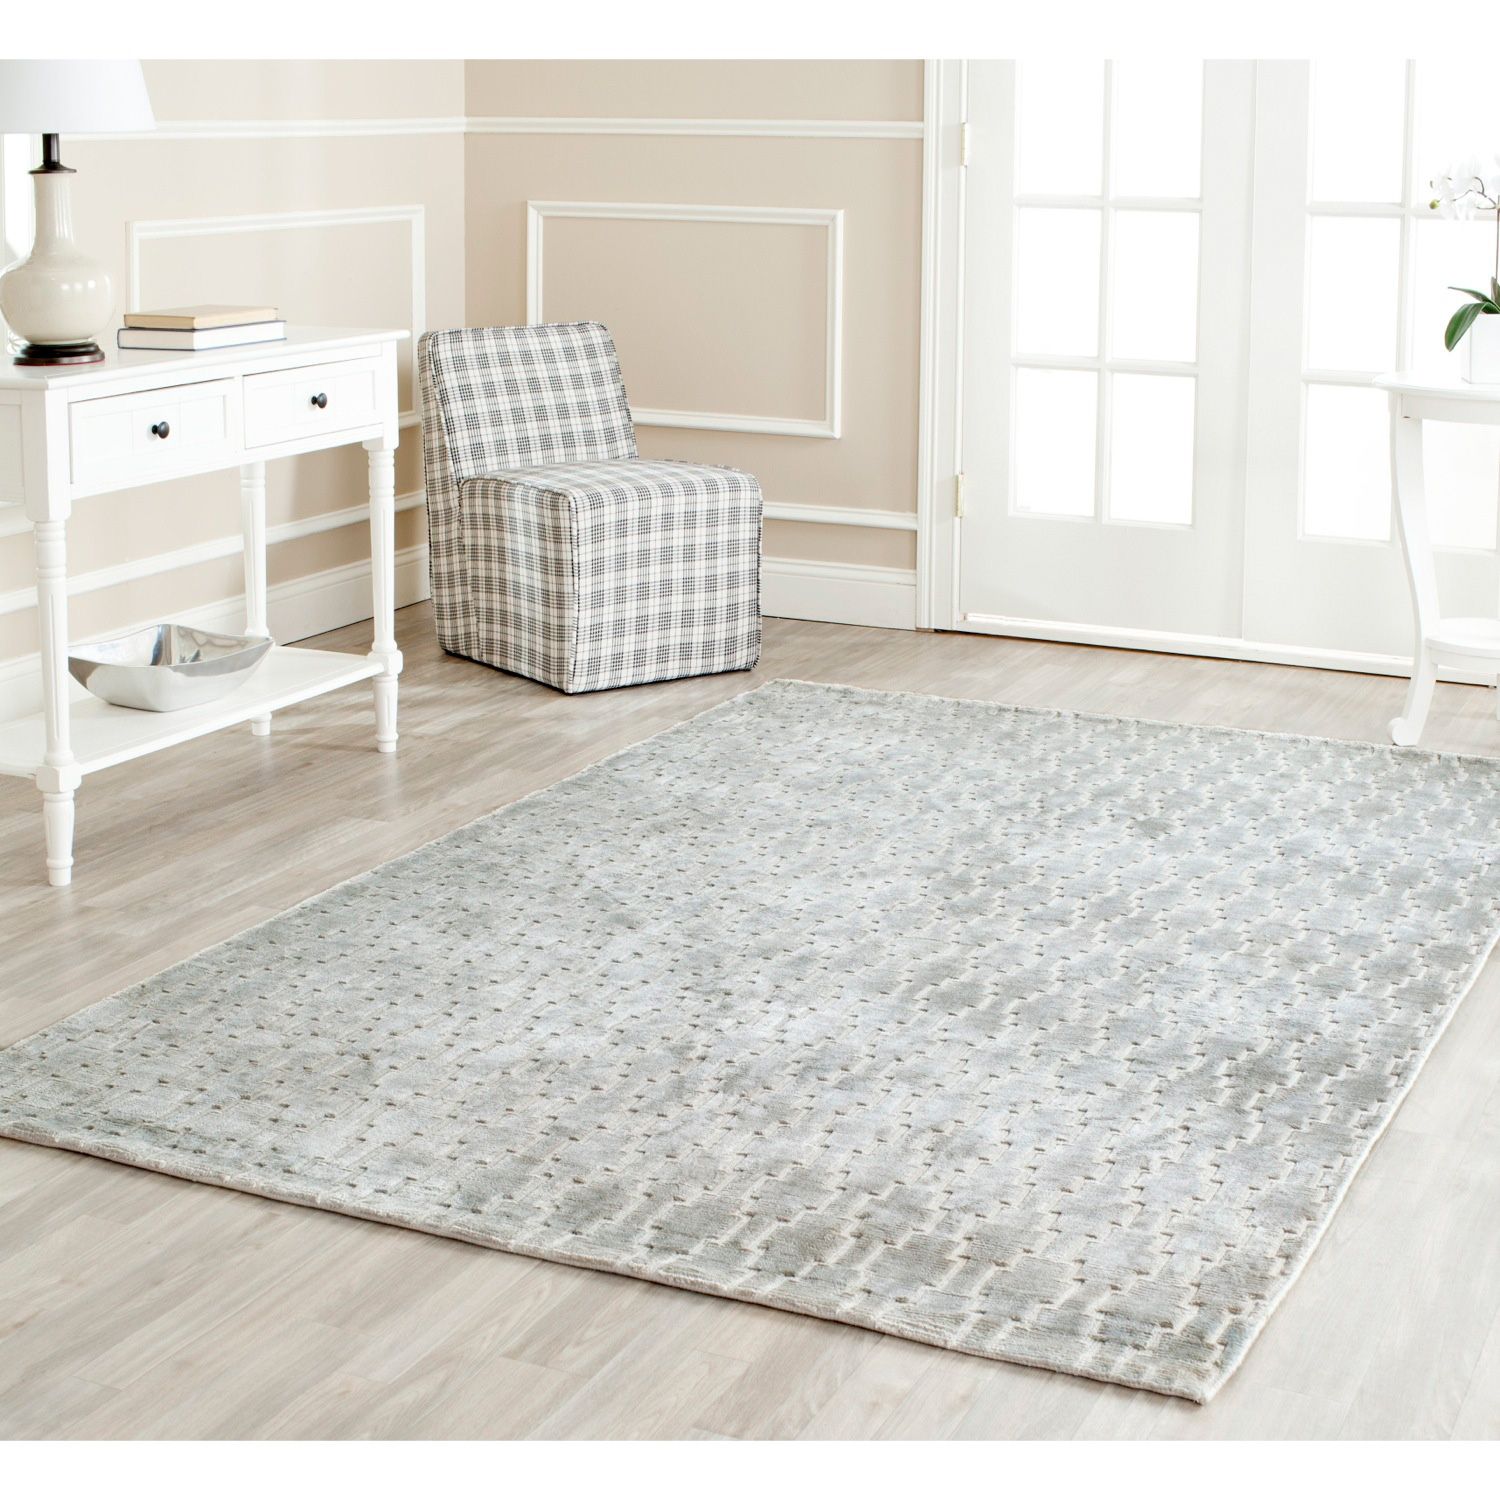 Rugs Area Rugs 3×5 3×5 Rug 4×6 Area Rugs Pertaining To Wool Area Rugs 4× (View 6 of 15)